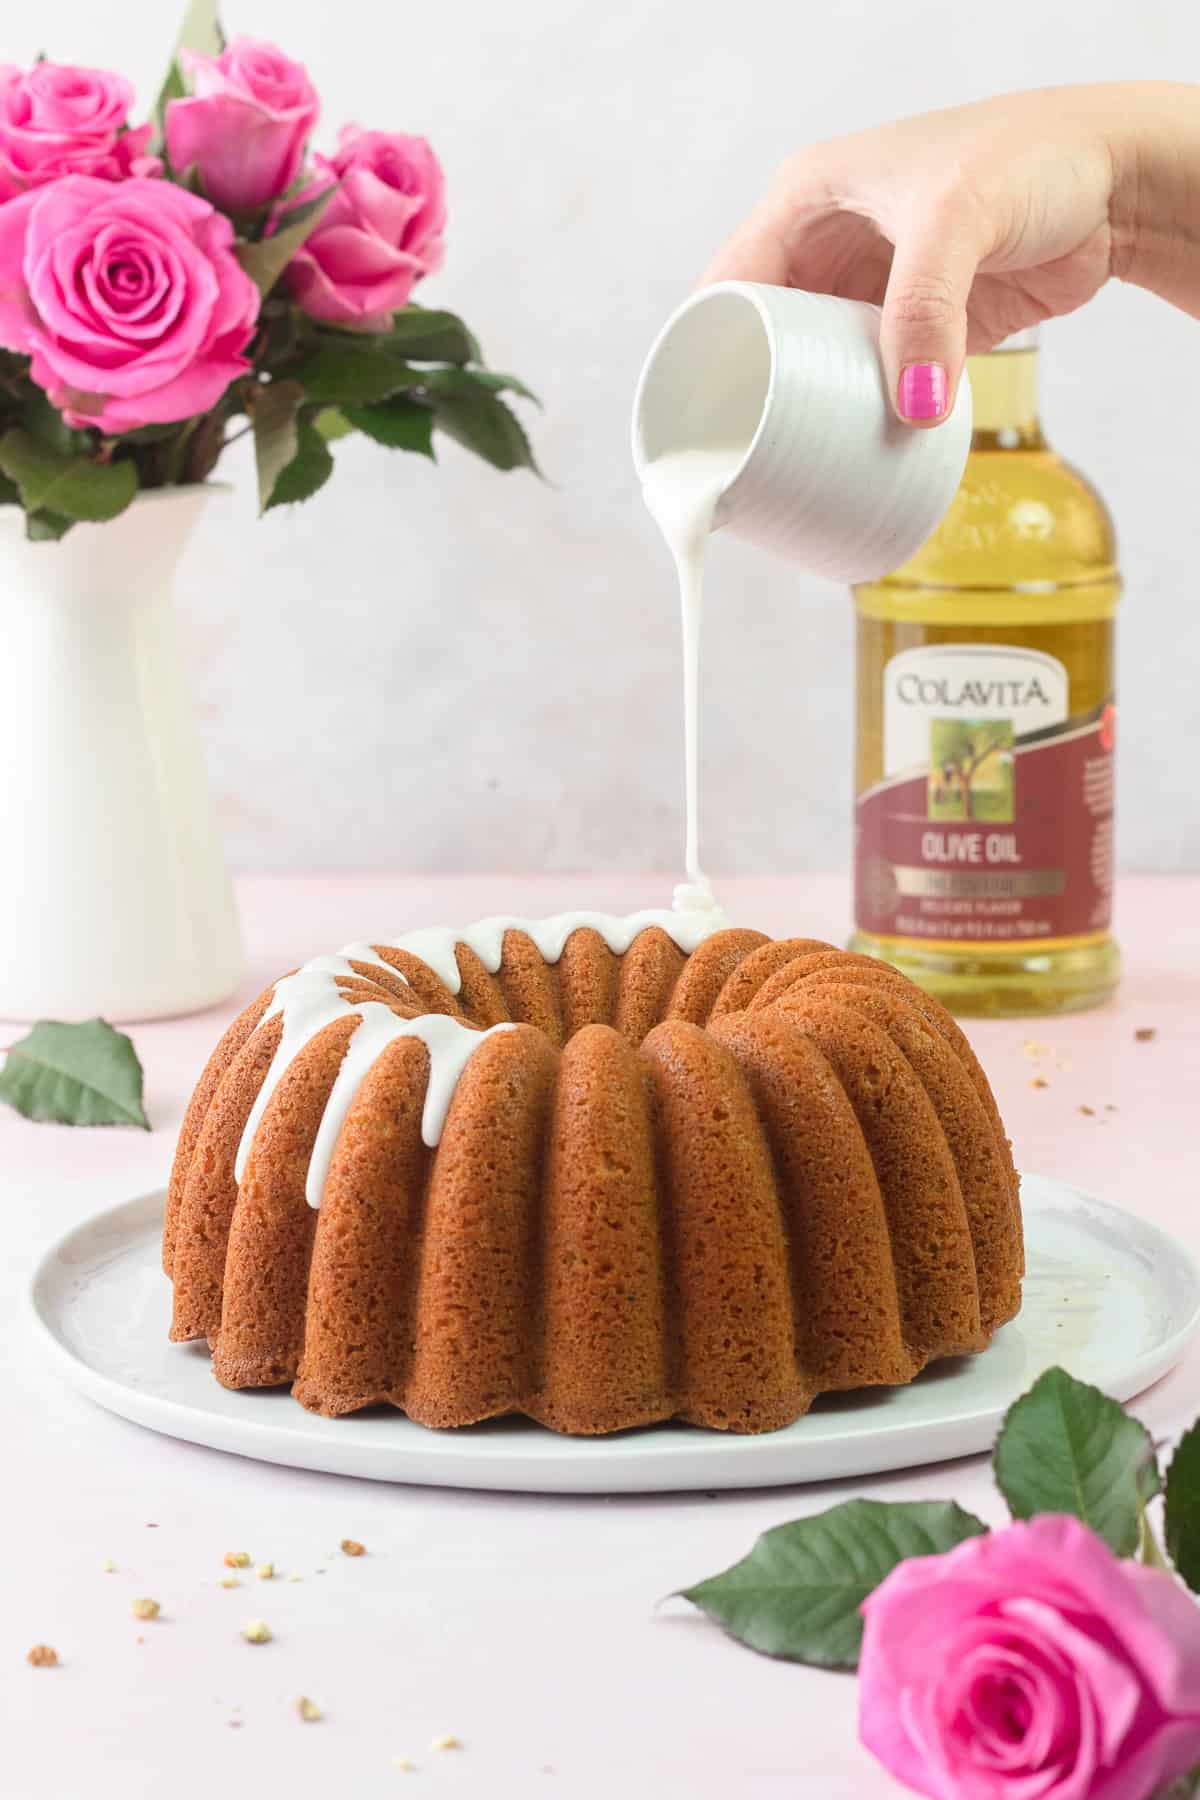 Pistachio Olive Oil Cake is being drizzled with the rose glaze